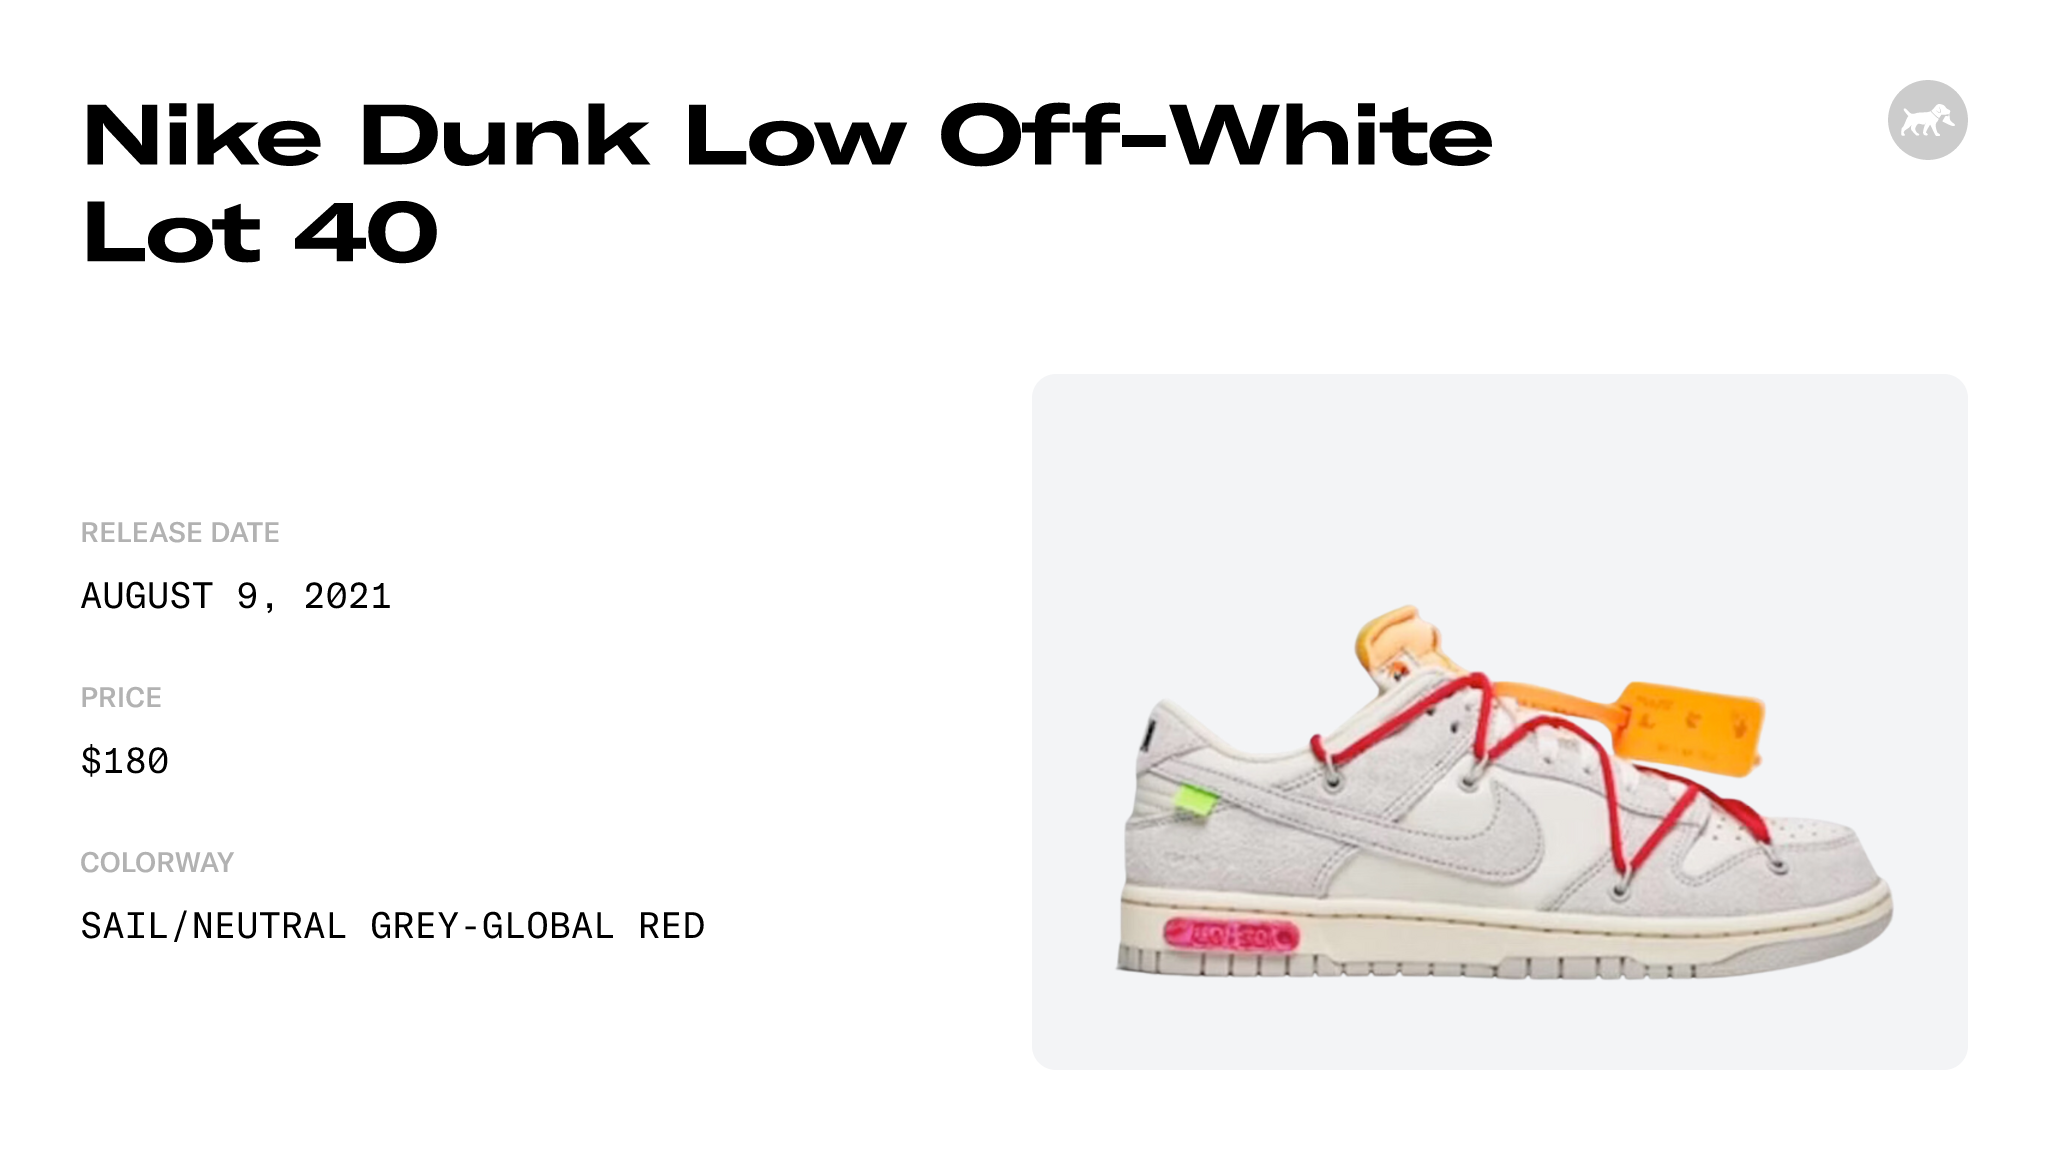 Nike Dunk Low Off-White Lot 40 - DJ0950-103 Raffles and Release Date